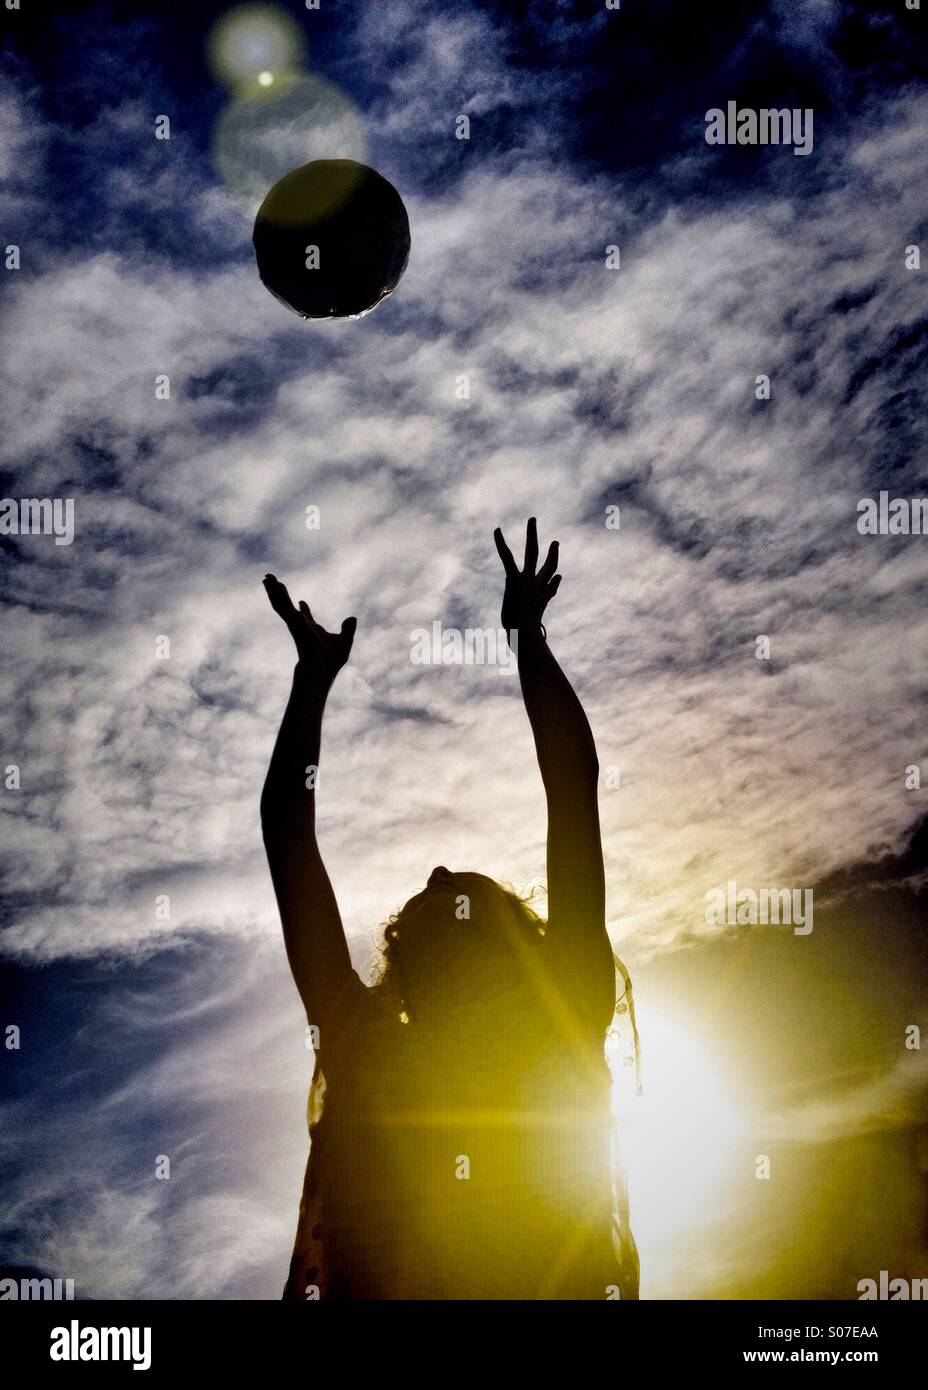 Young girl catching football backlit by sun Stock Photo